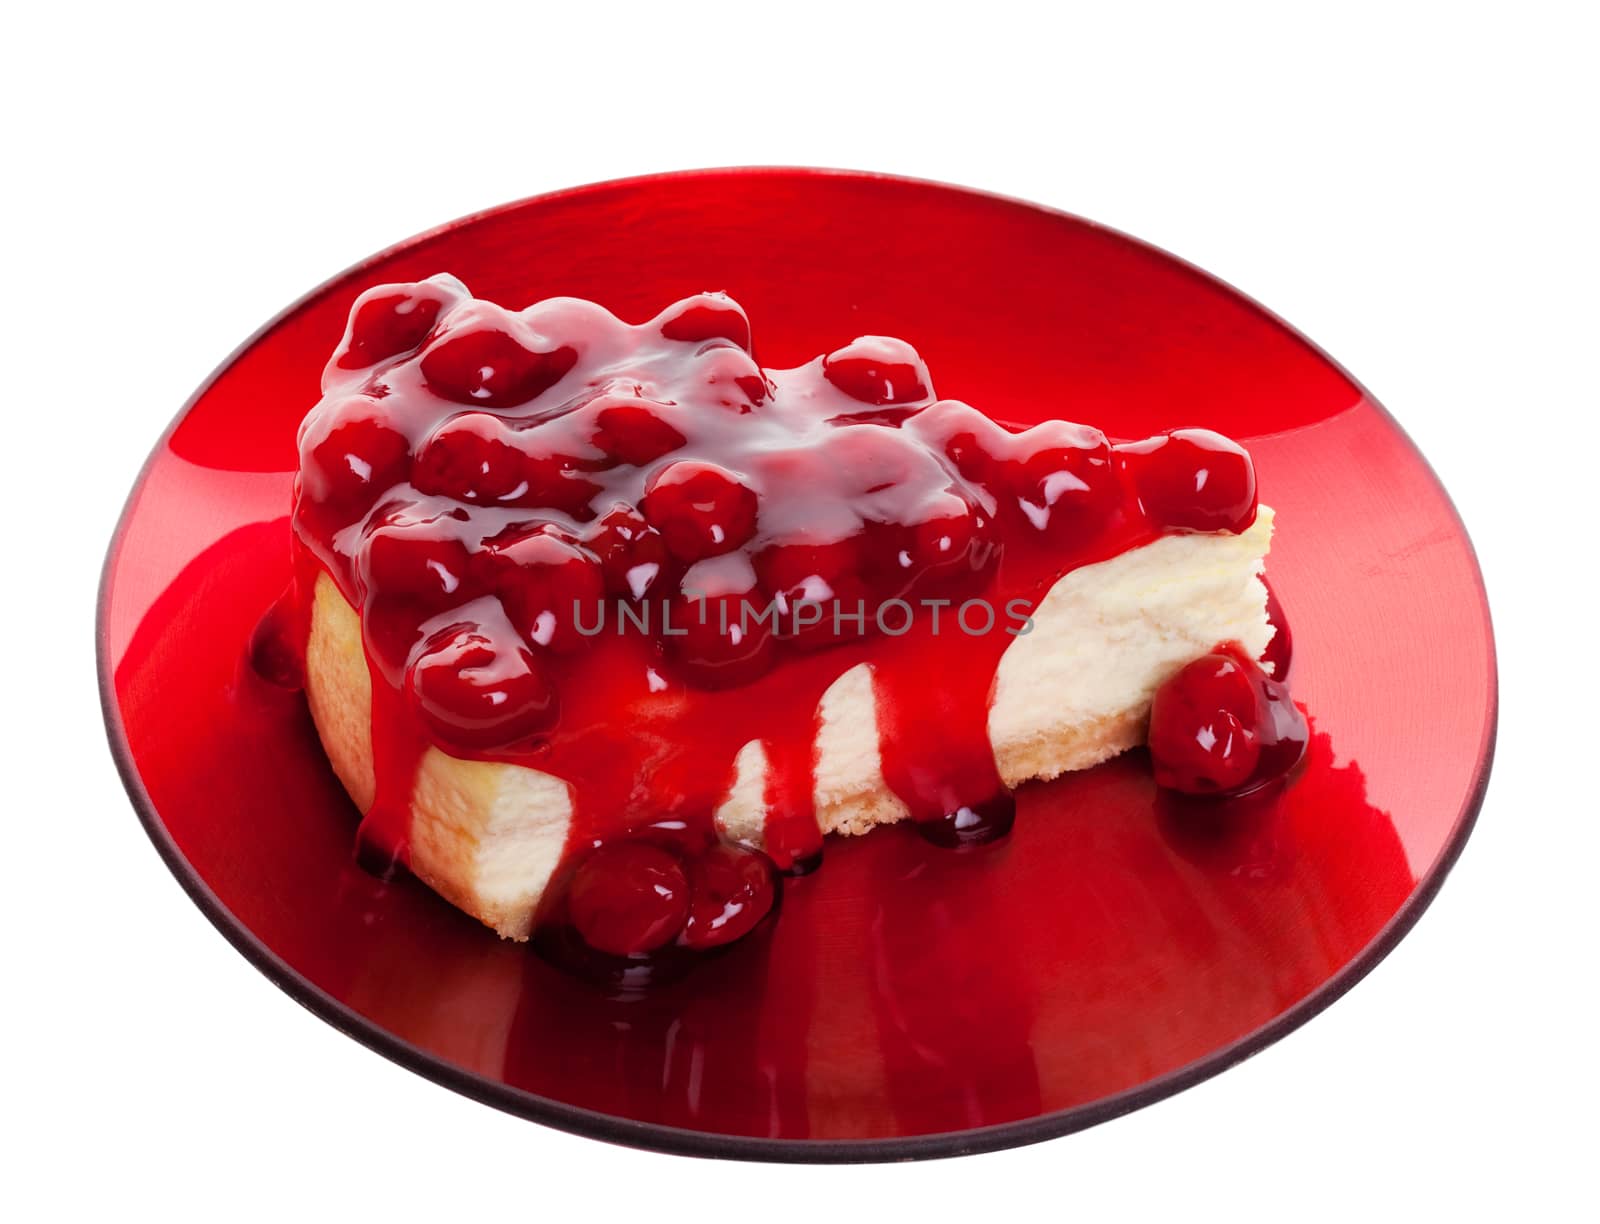 Decadent cherry cheesecake served on a candy apple red plate.  Shot on white background.